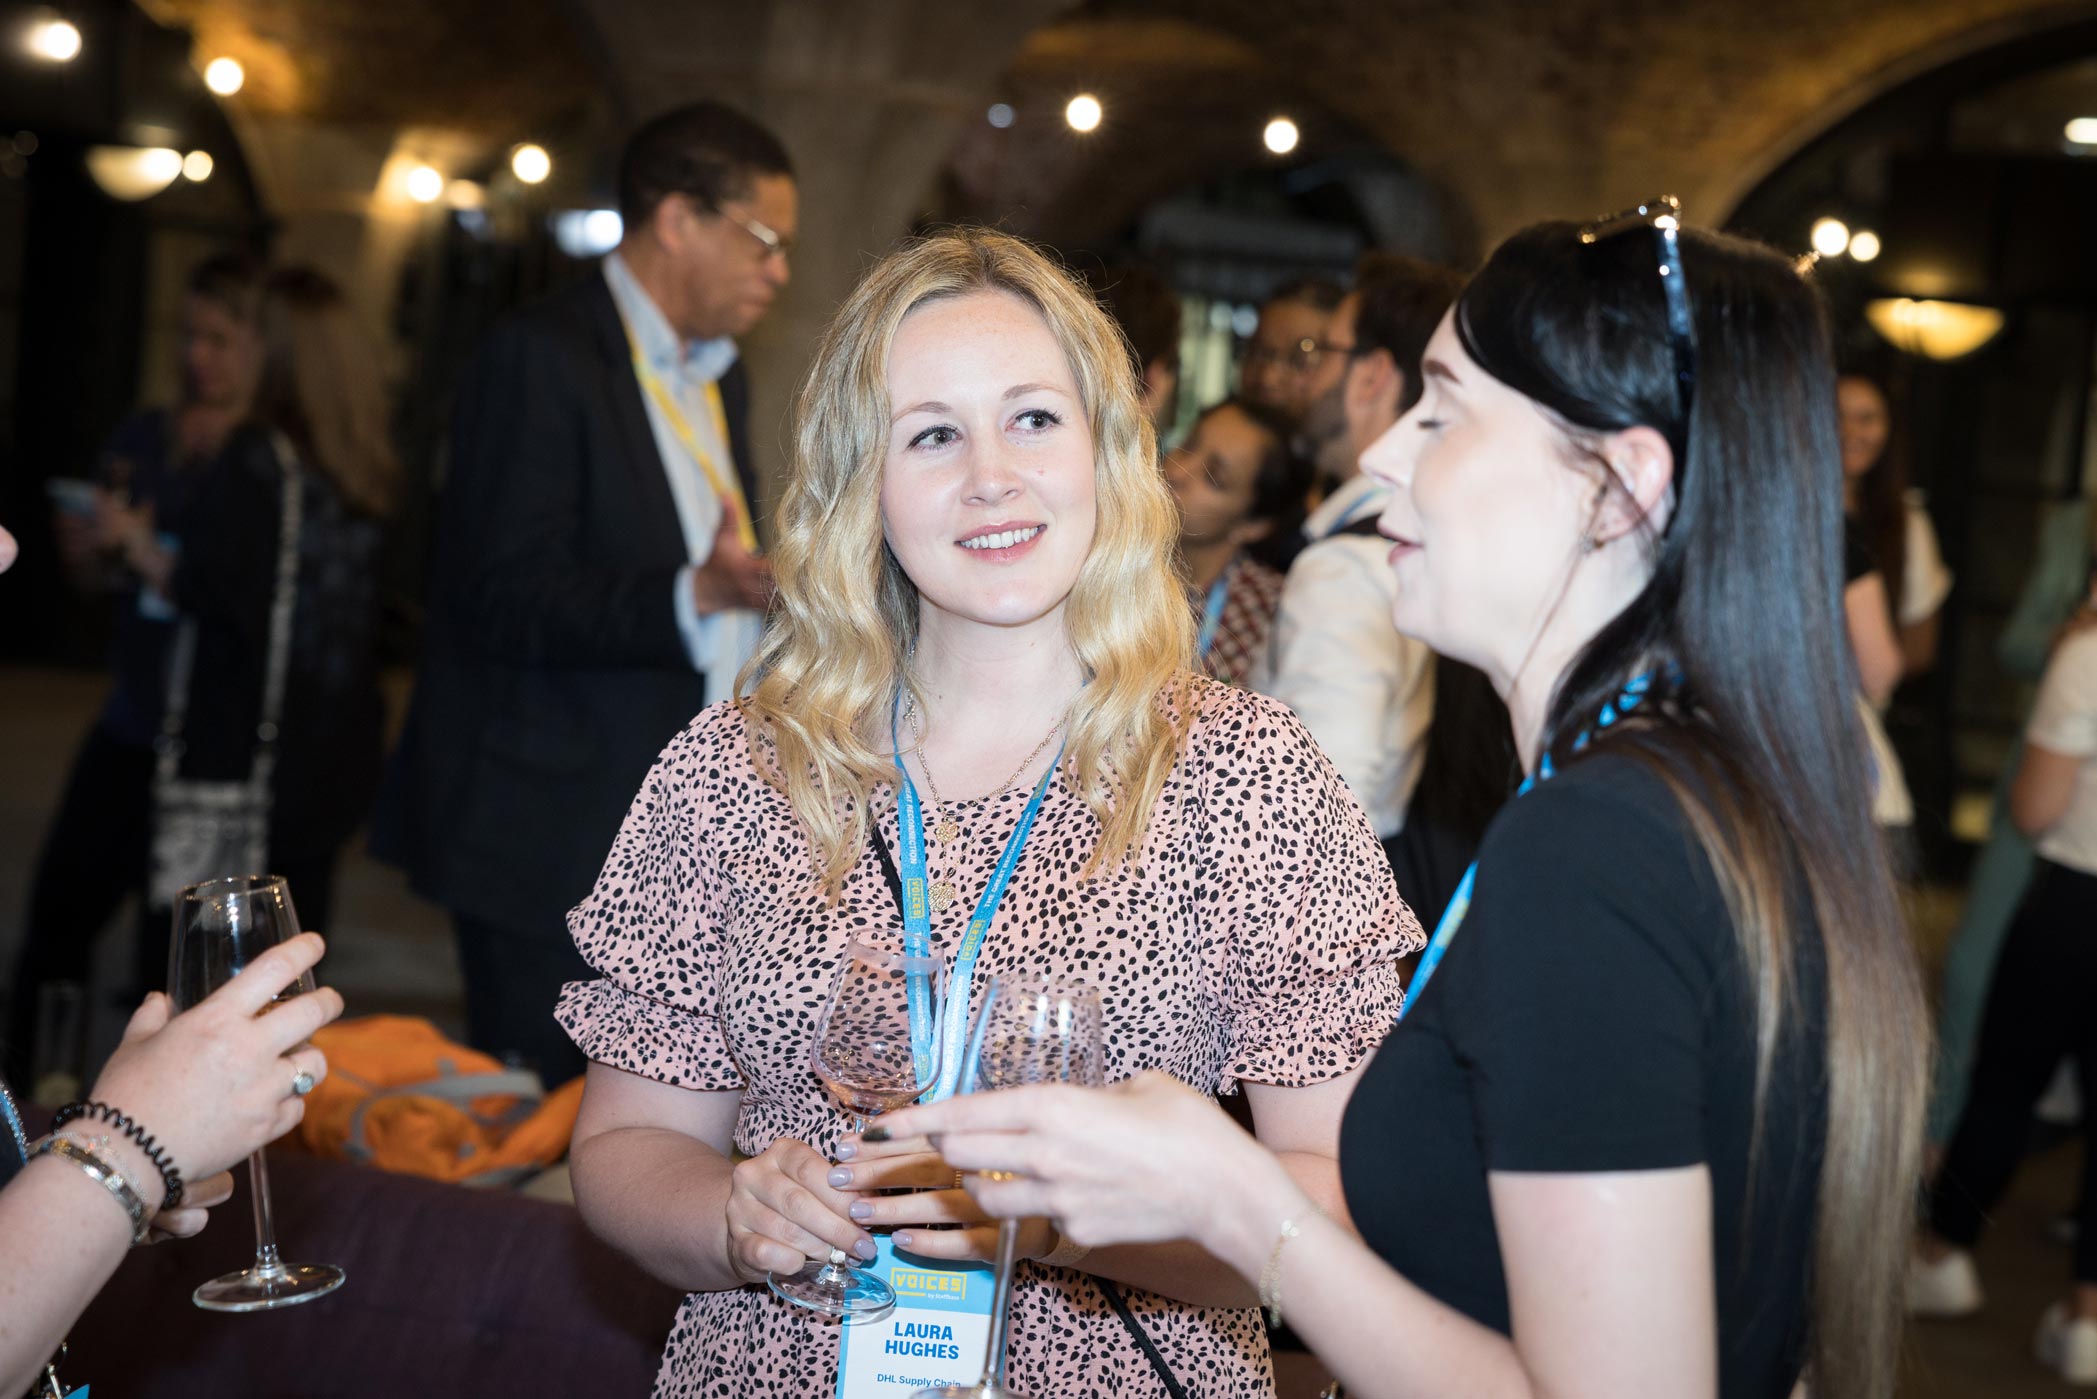 London corporate event photography at Tobacco Dock